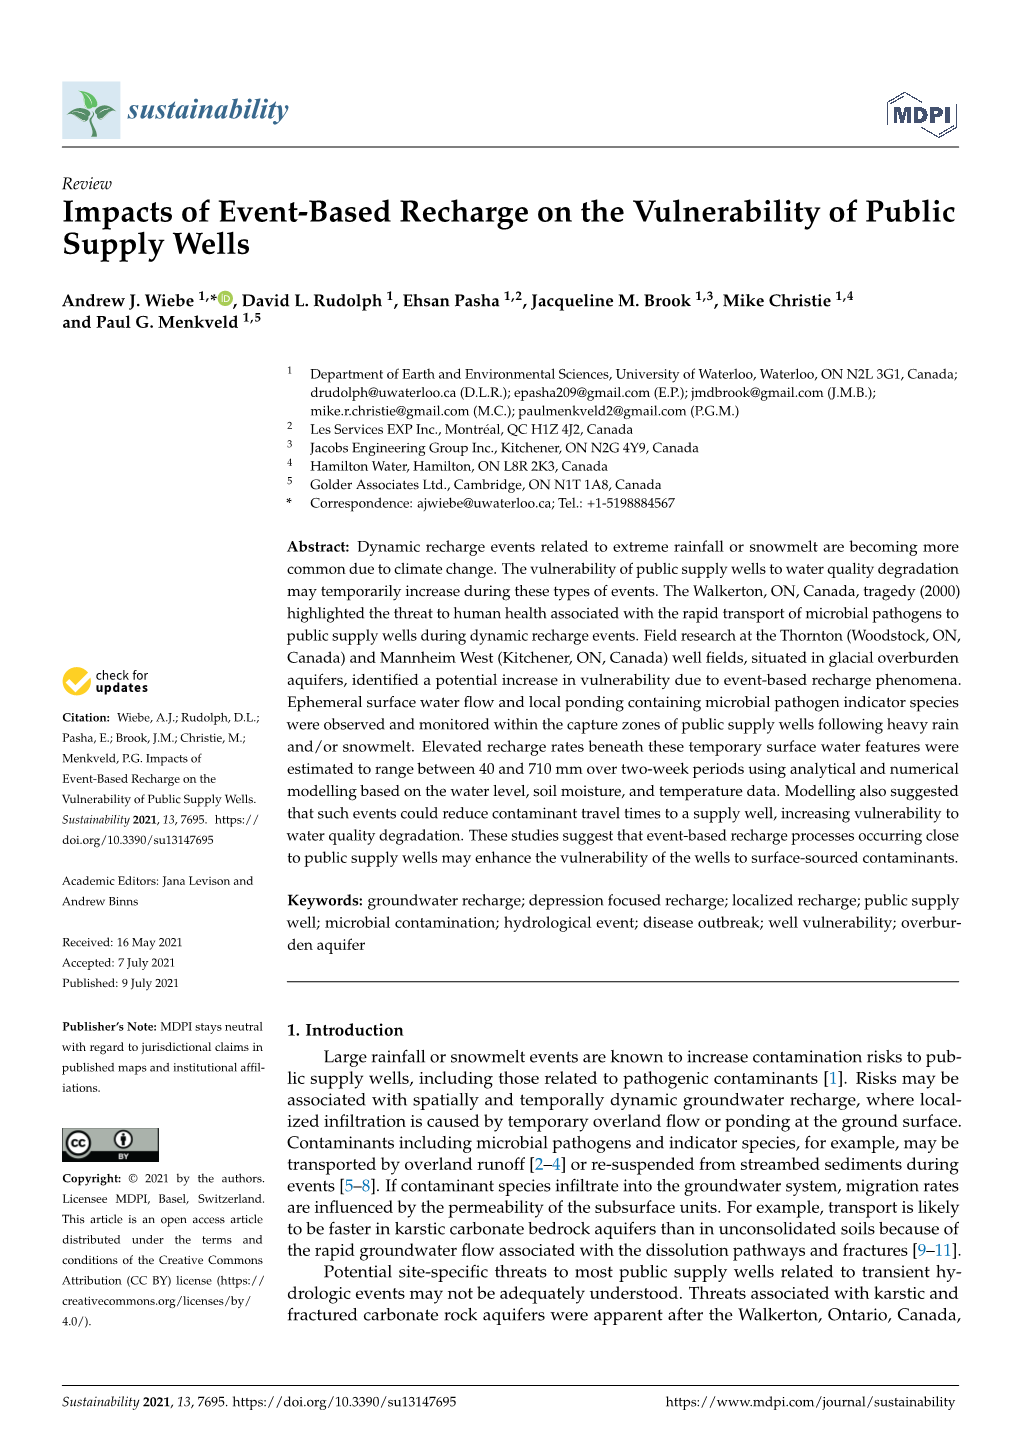 Impacts of Event-Based Recharge on the Vulnerability of Public Supply Wells